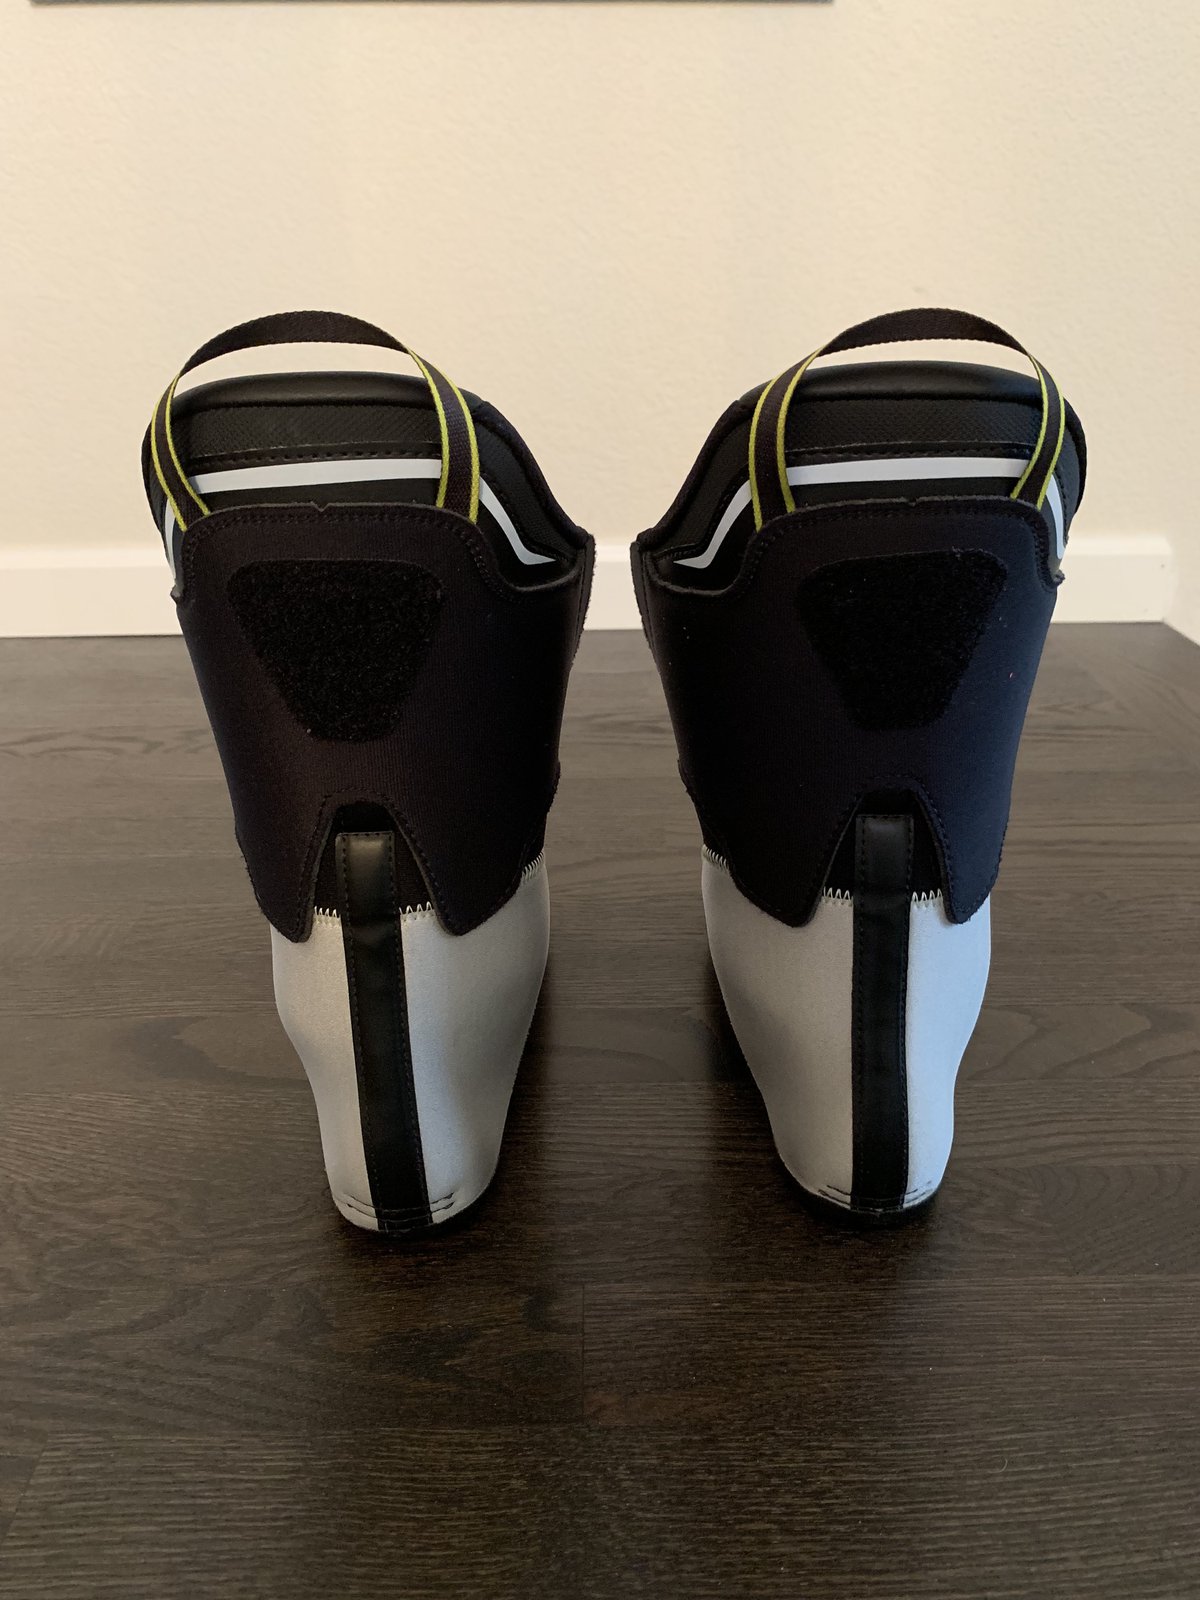 Brand New 2019 Salomon X Pro 130 Liners 25.5 + Atomic Hawx - Sell and ...